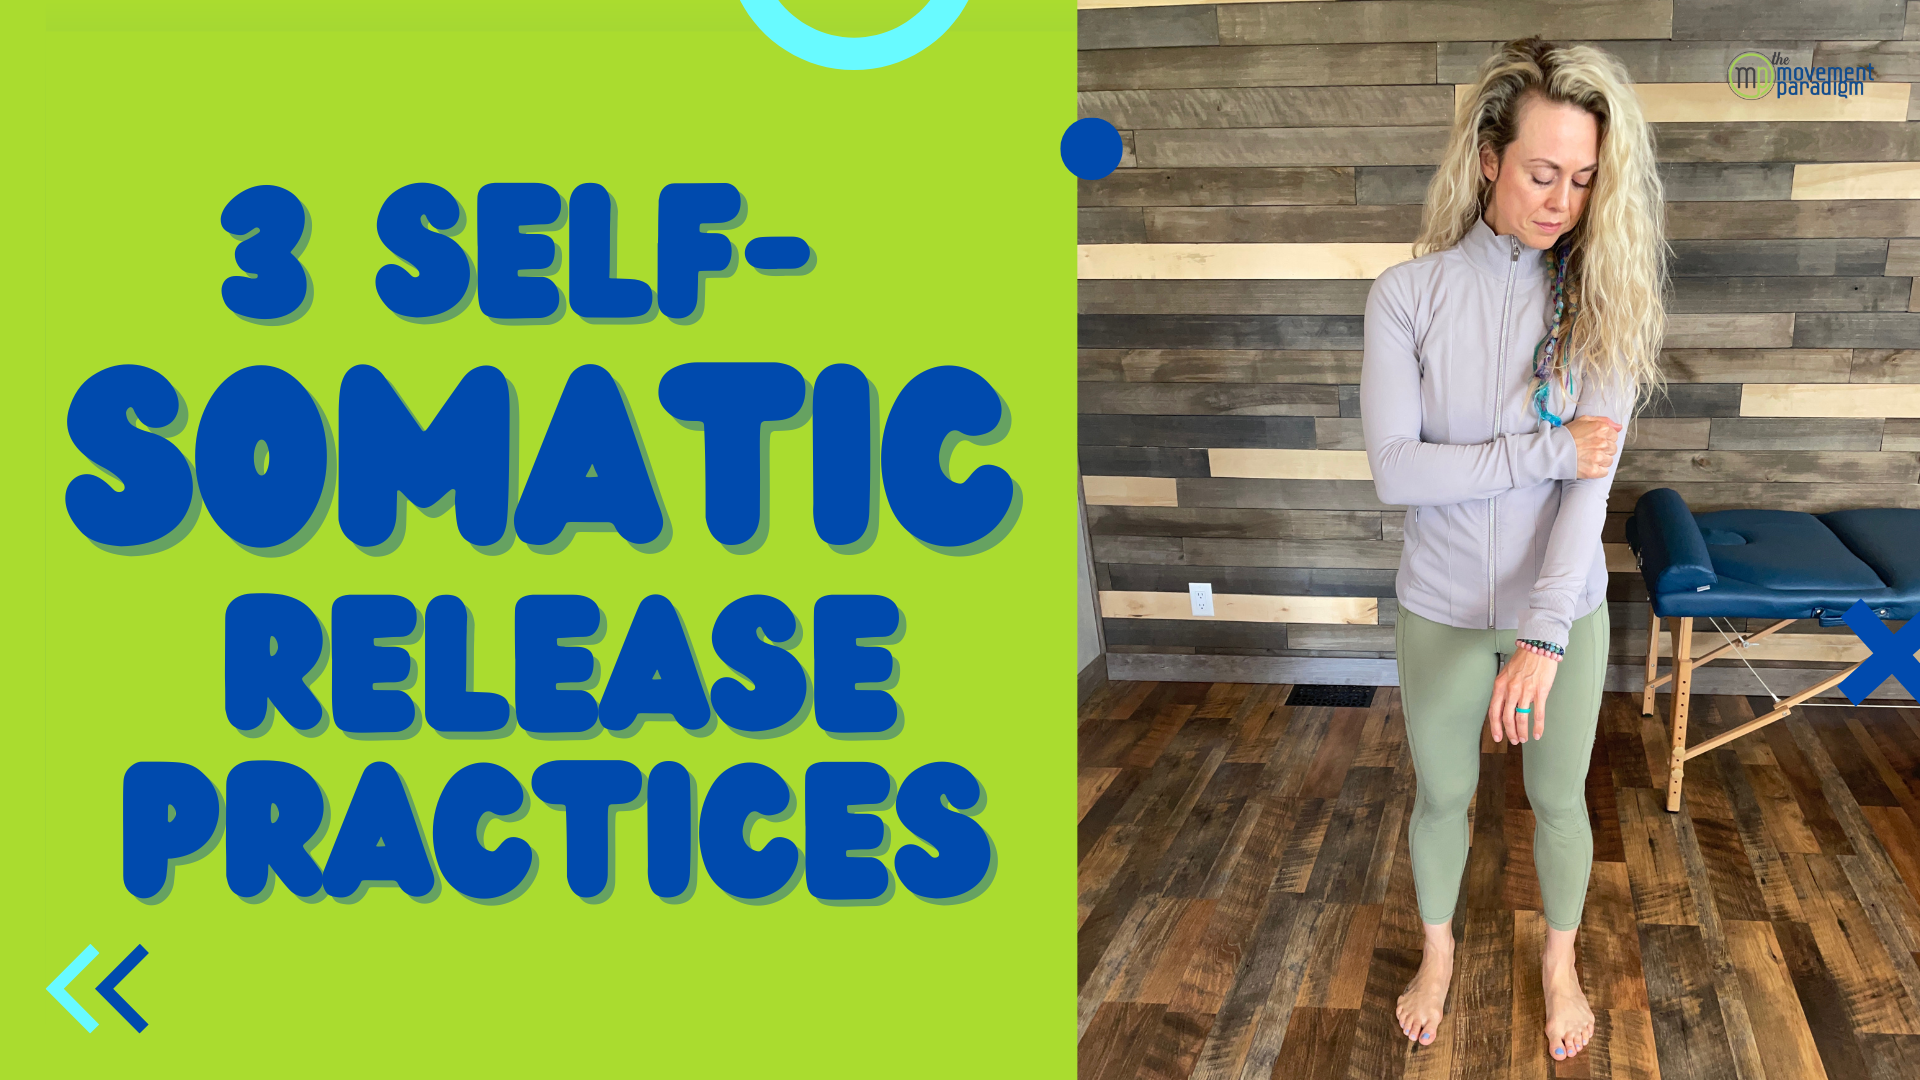 SOMATIC RELEASE PRACTICES